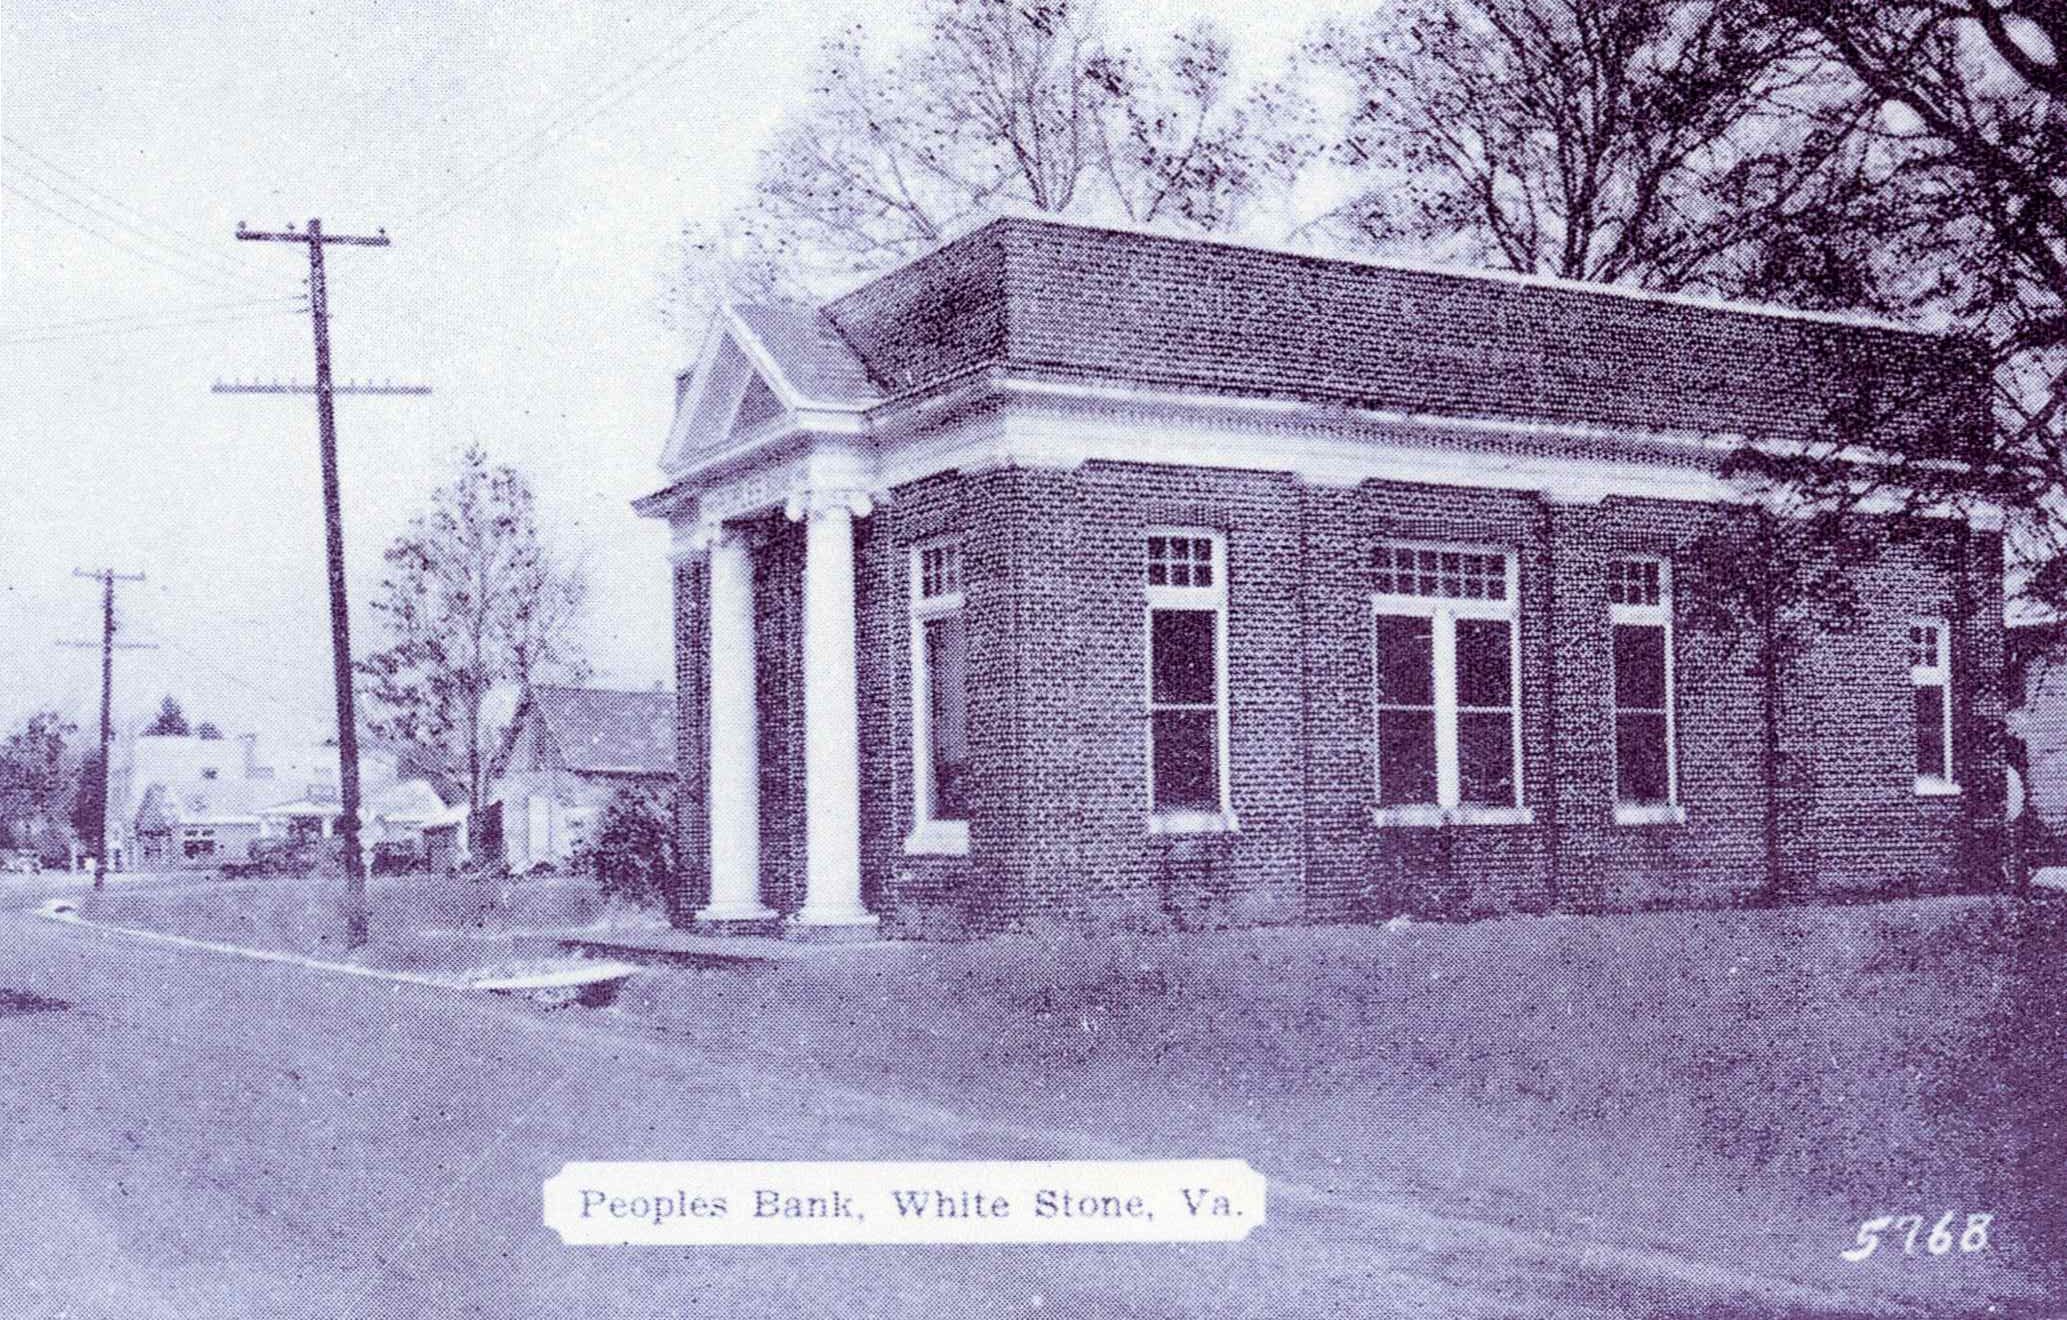 Peoples Bank, White Stone